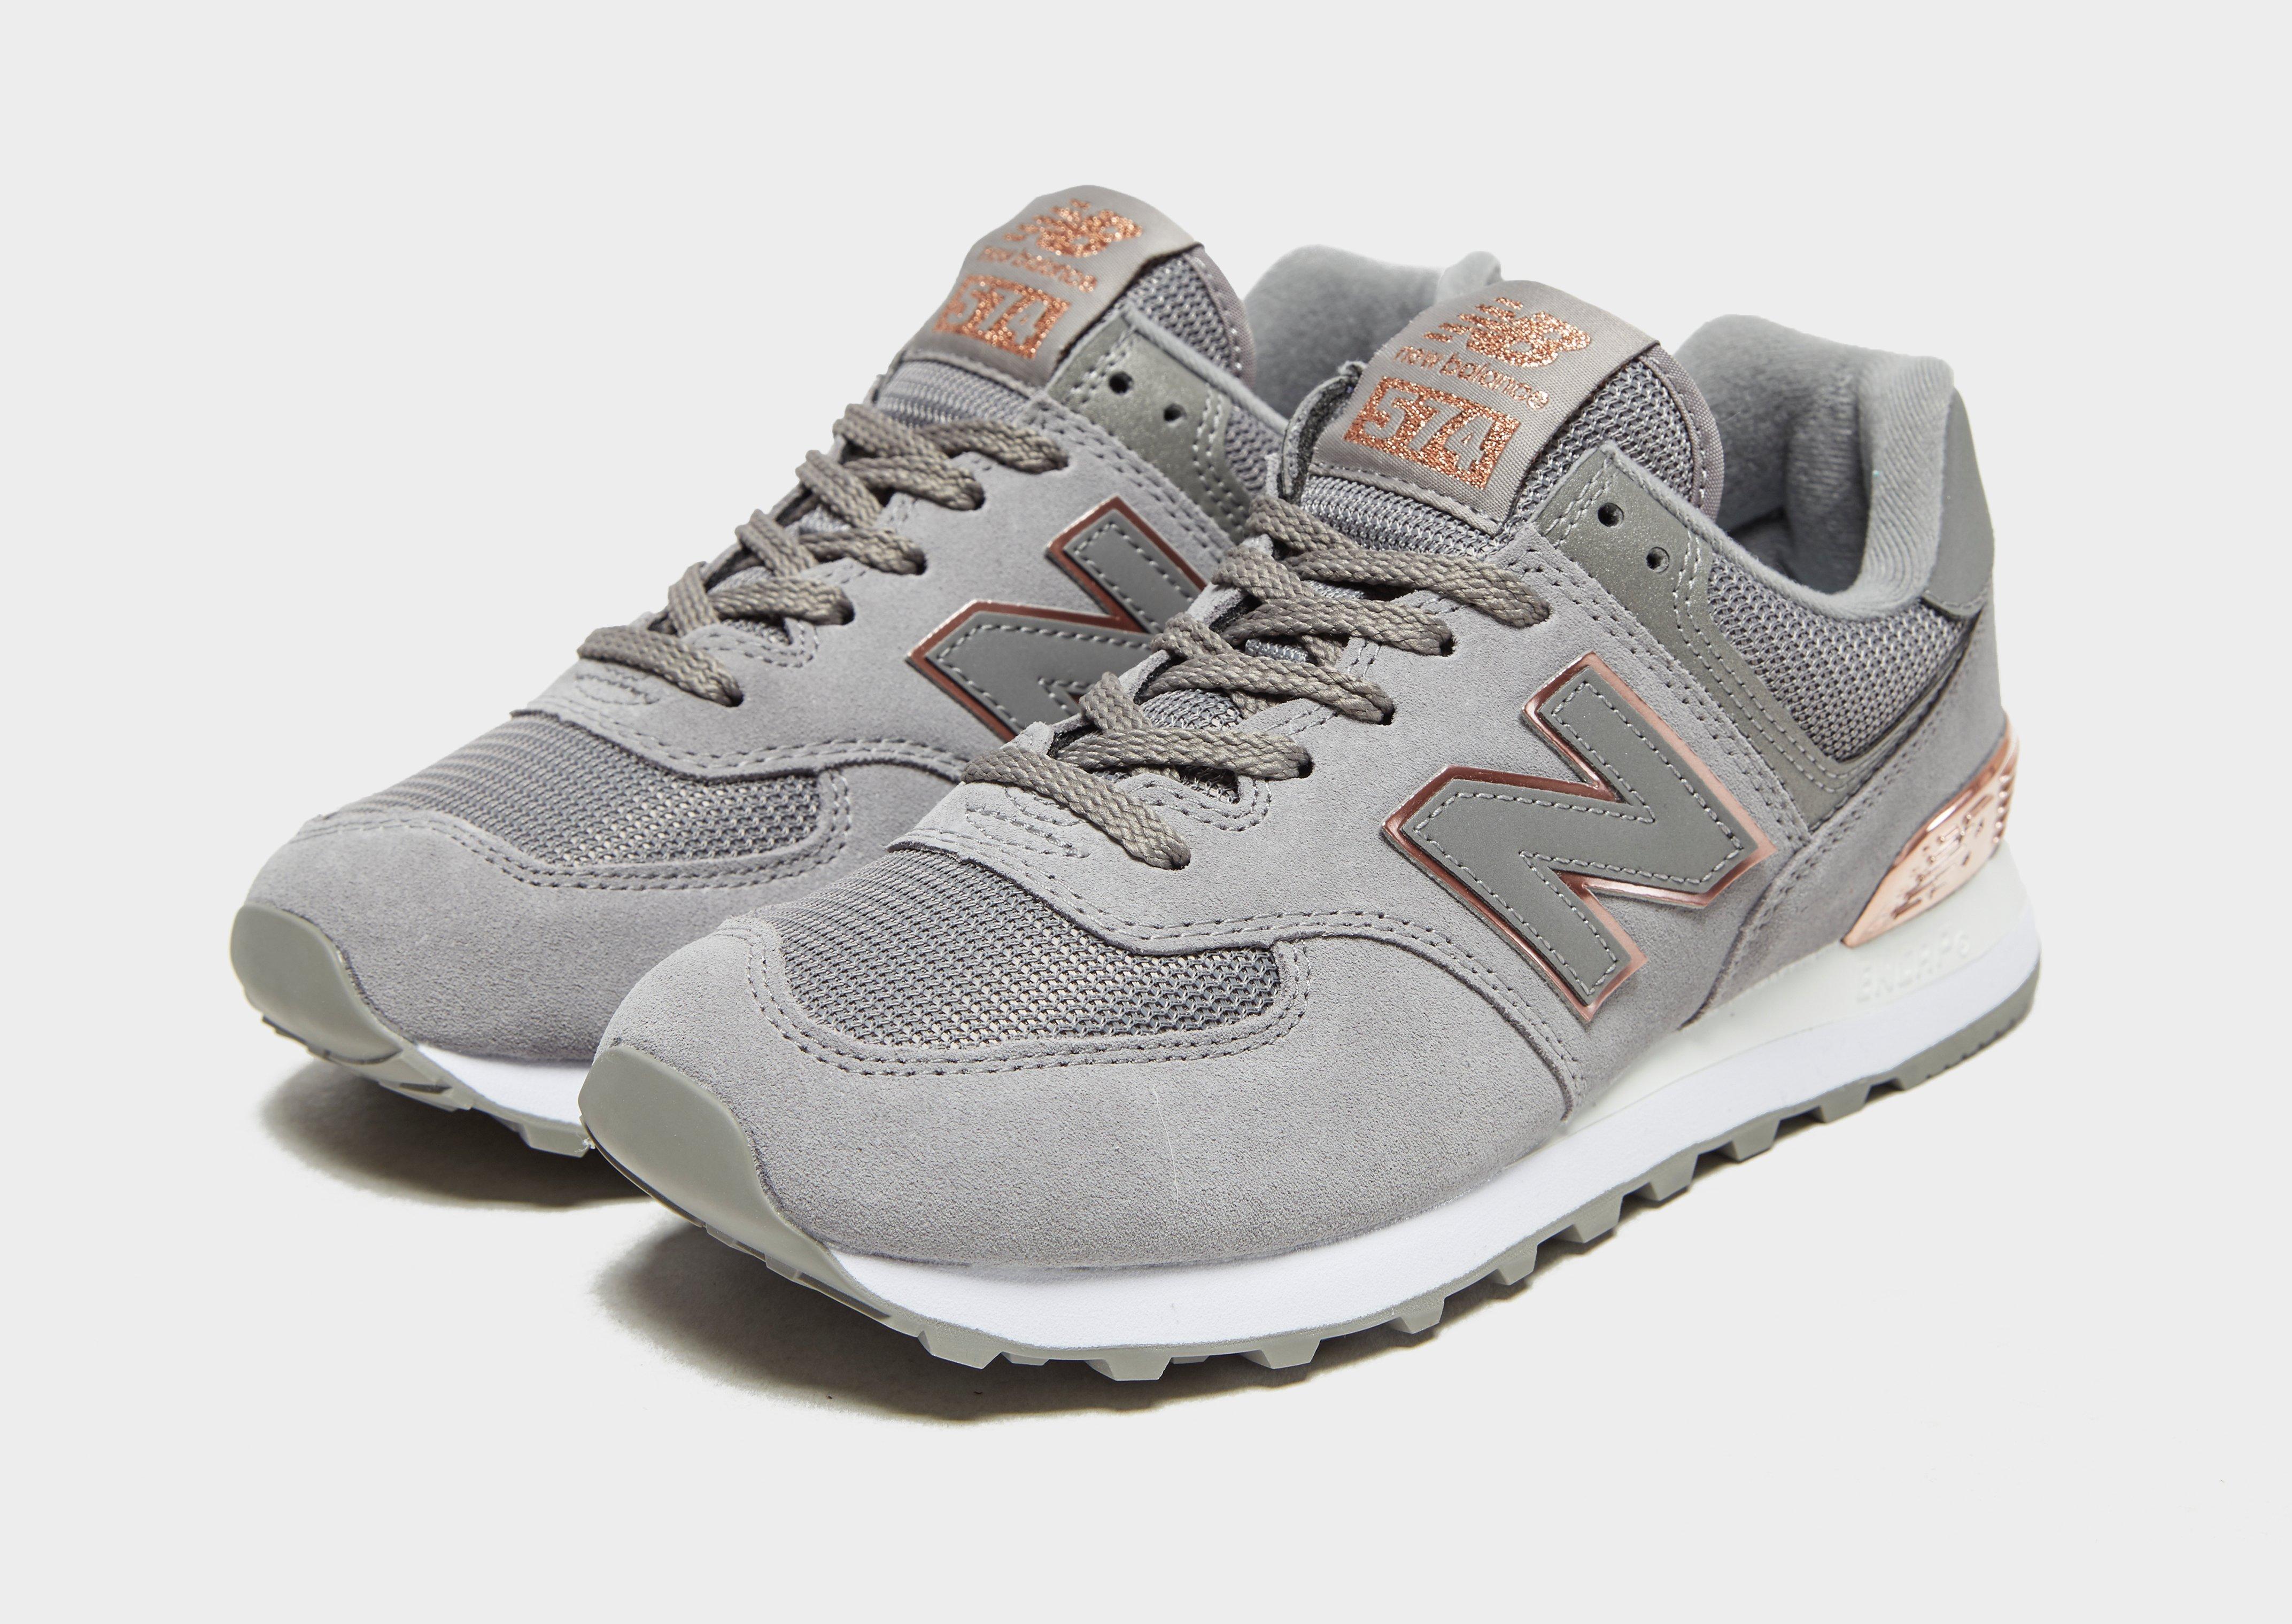 new balance 574 gray and rose gold